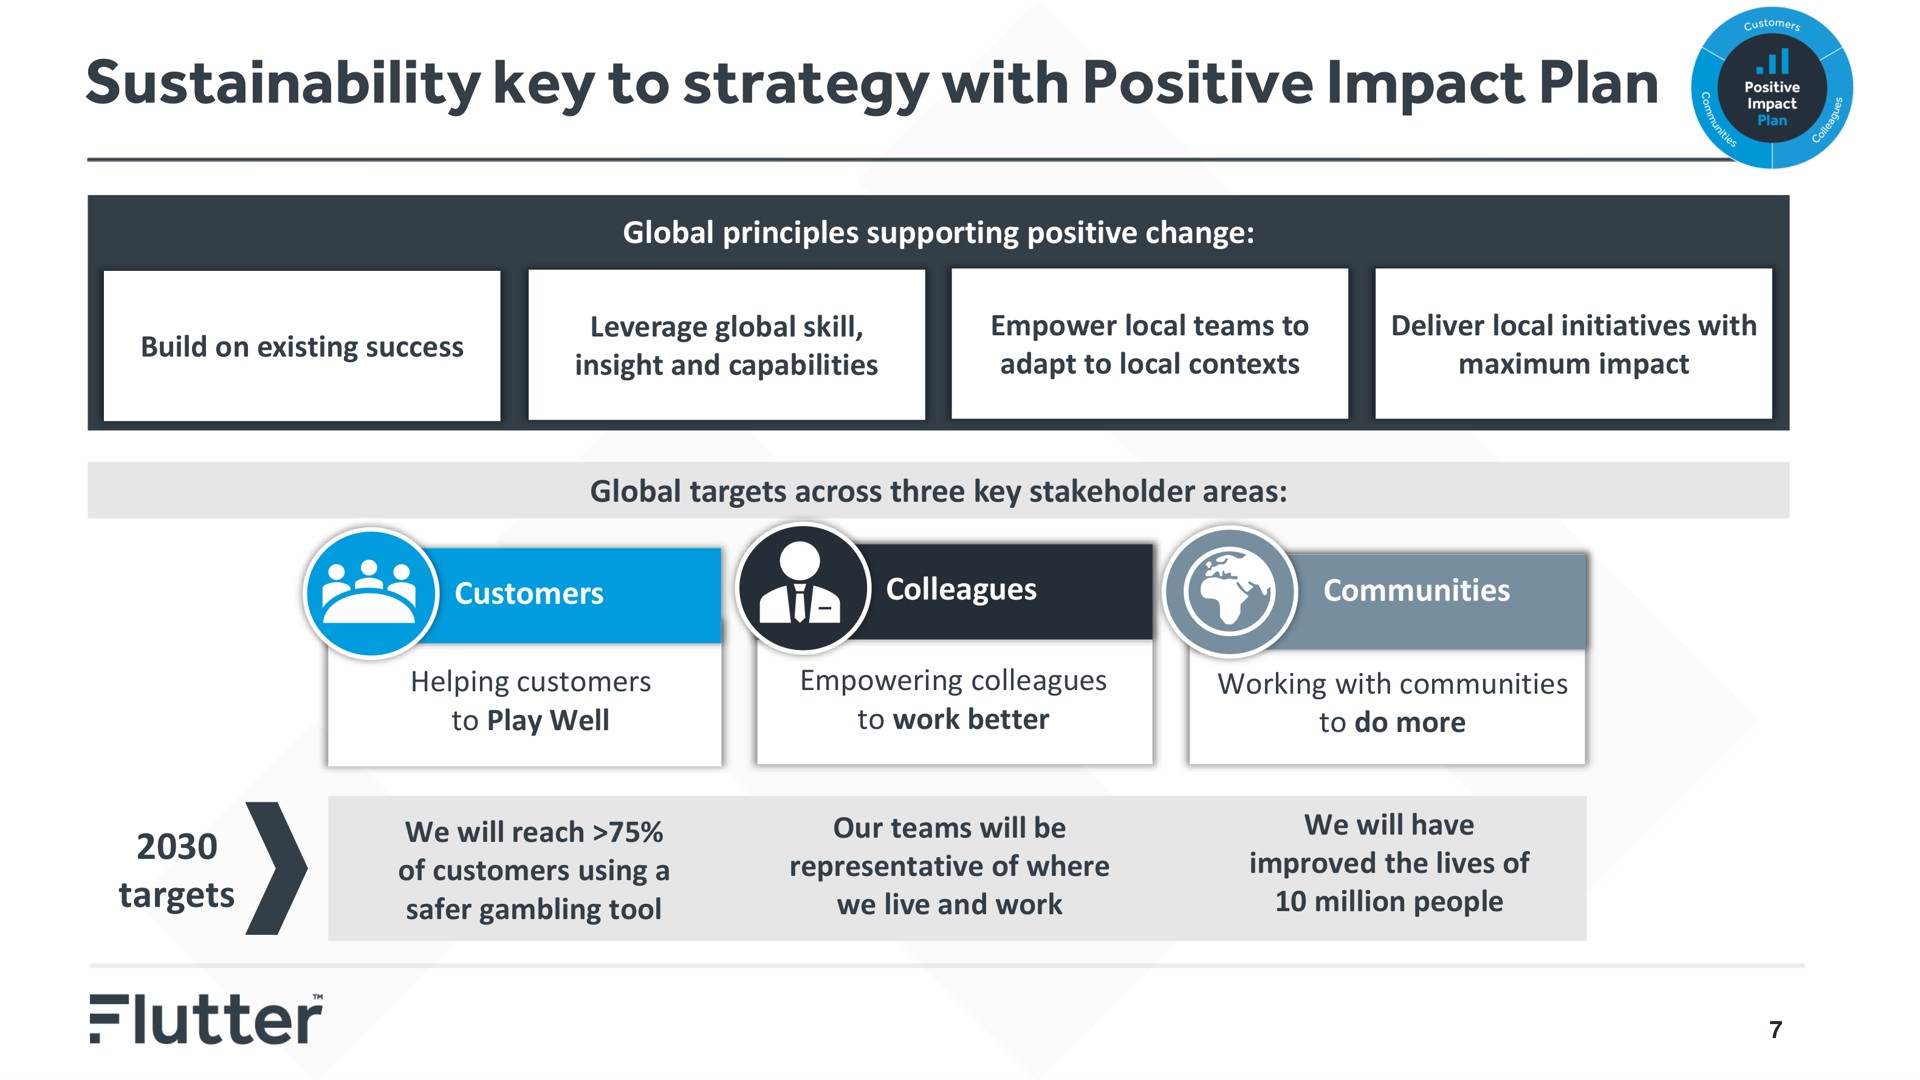 key to strategy with positive impact plan | Flutter